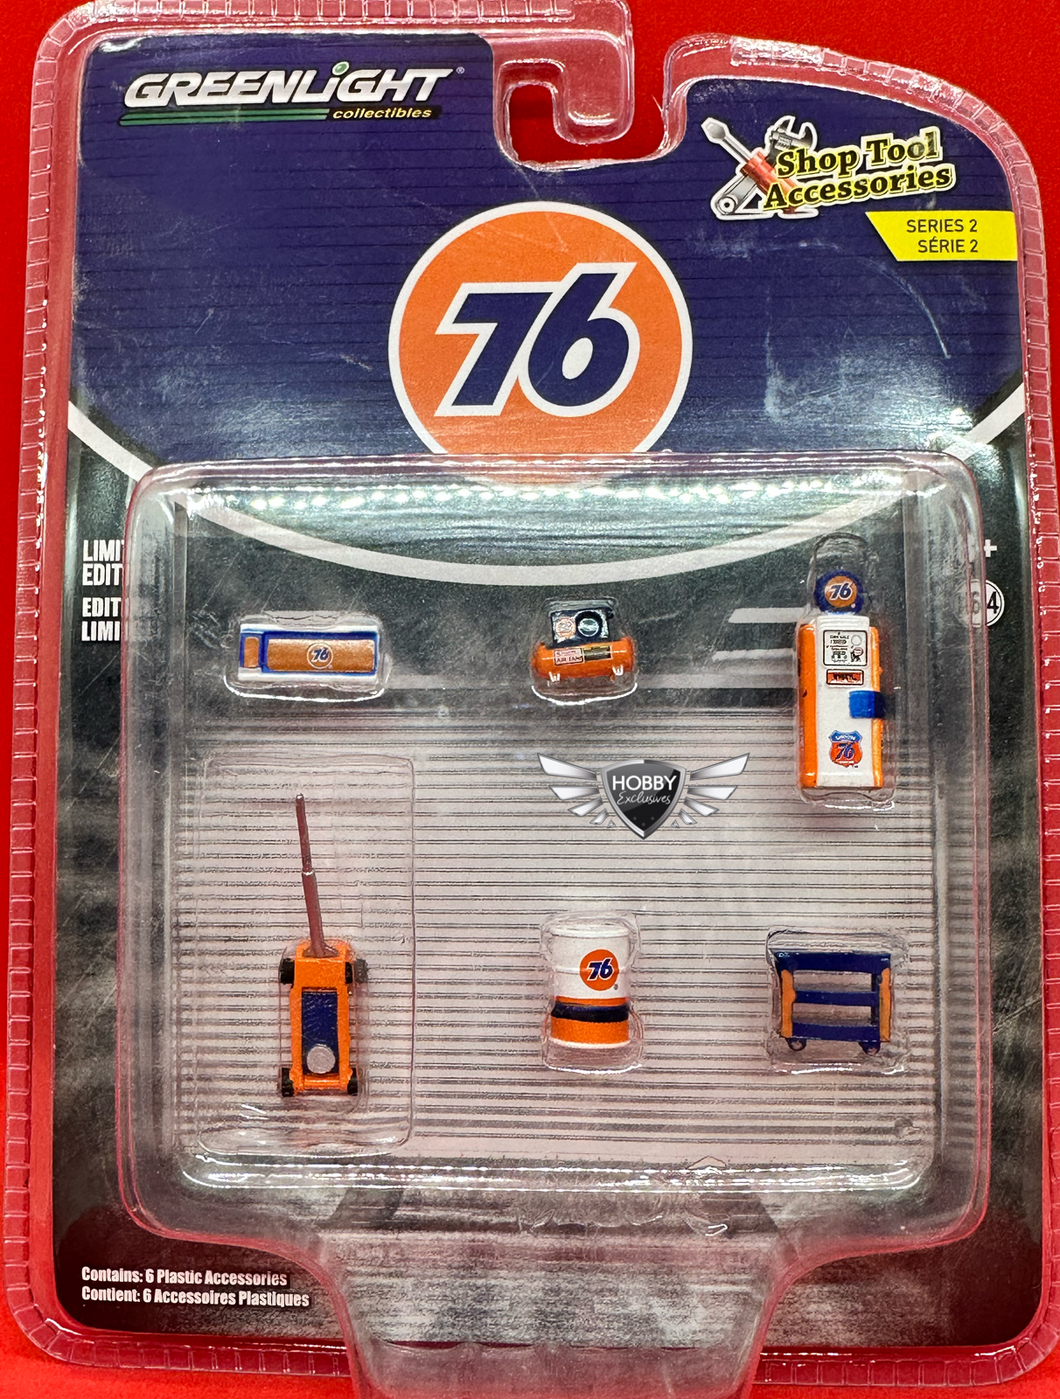 76 Shop Tool Accessories Greenlight 1:64 Scale